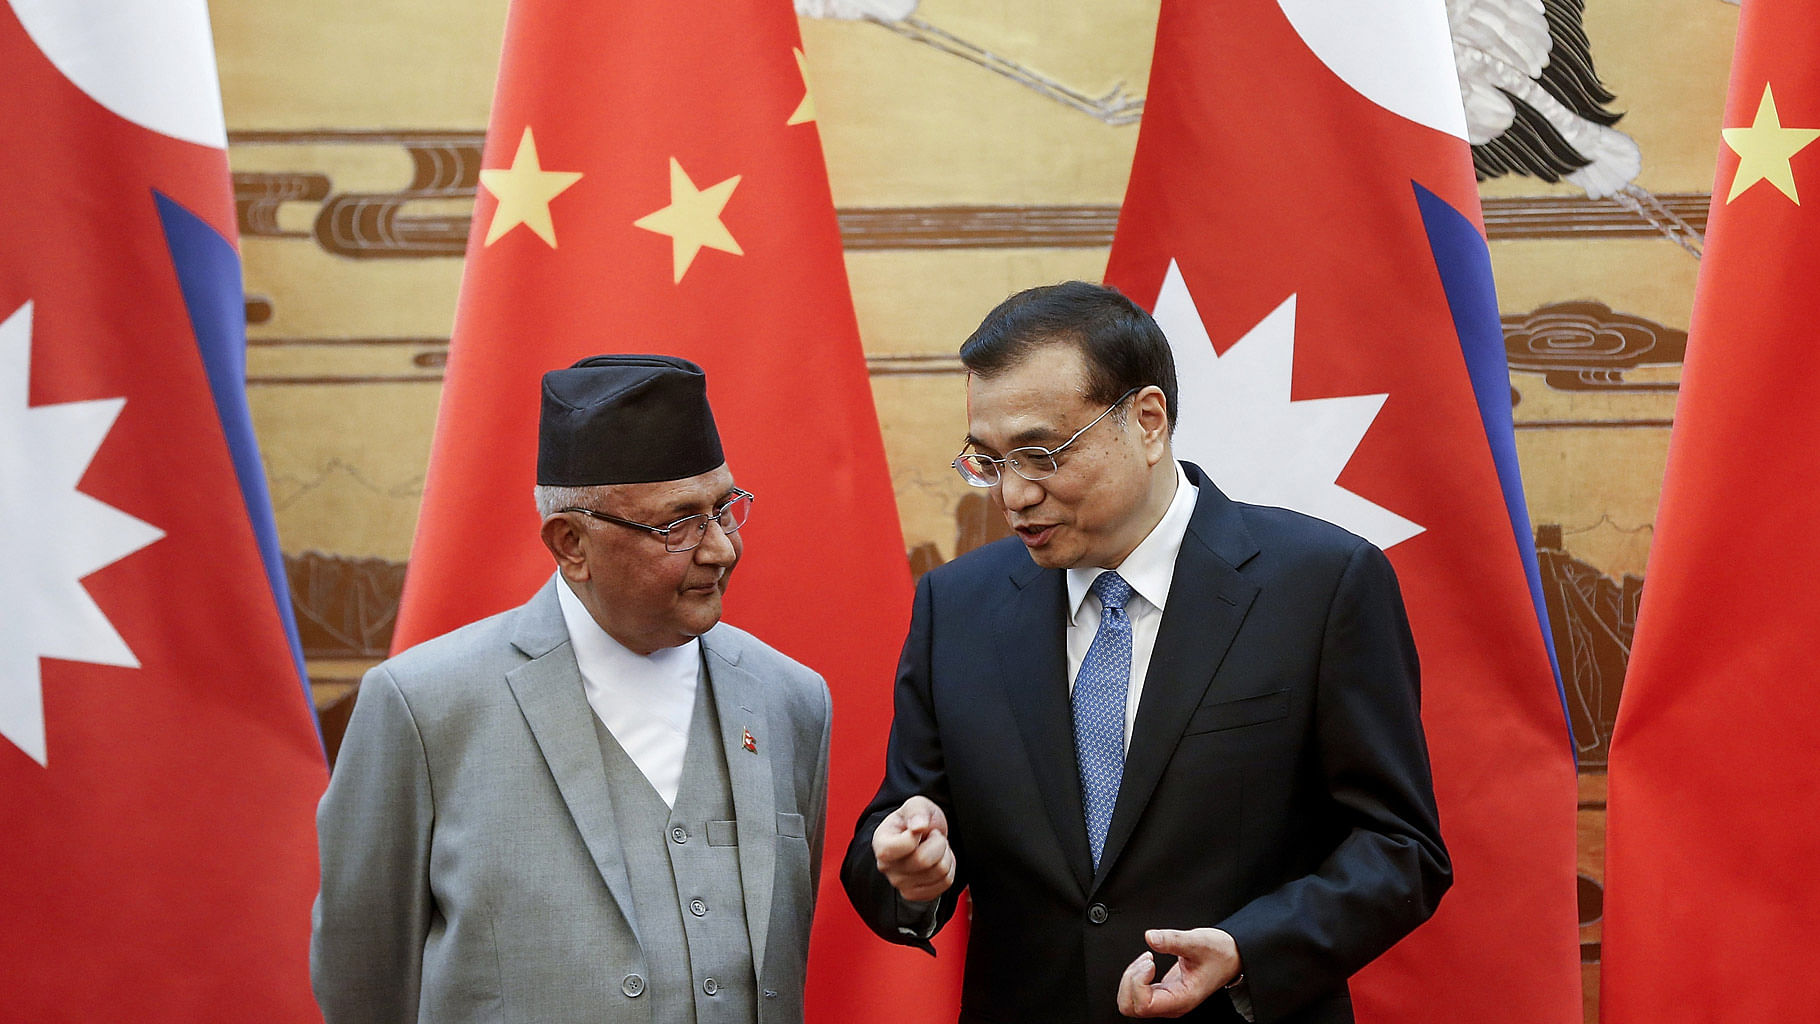 File photo of Chinese Premier Li Keqiang  with Nepal’s Prime Minister Khadga Prasad Oli during a signing ceremony at the Great Hall of the People, 21 March 2016 in Beijing, China.